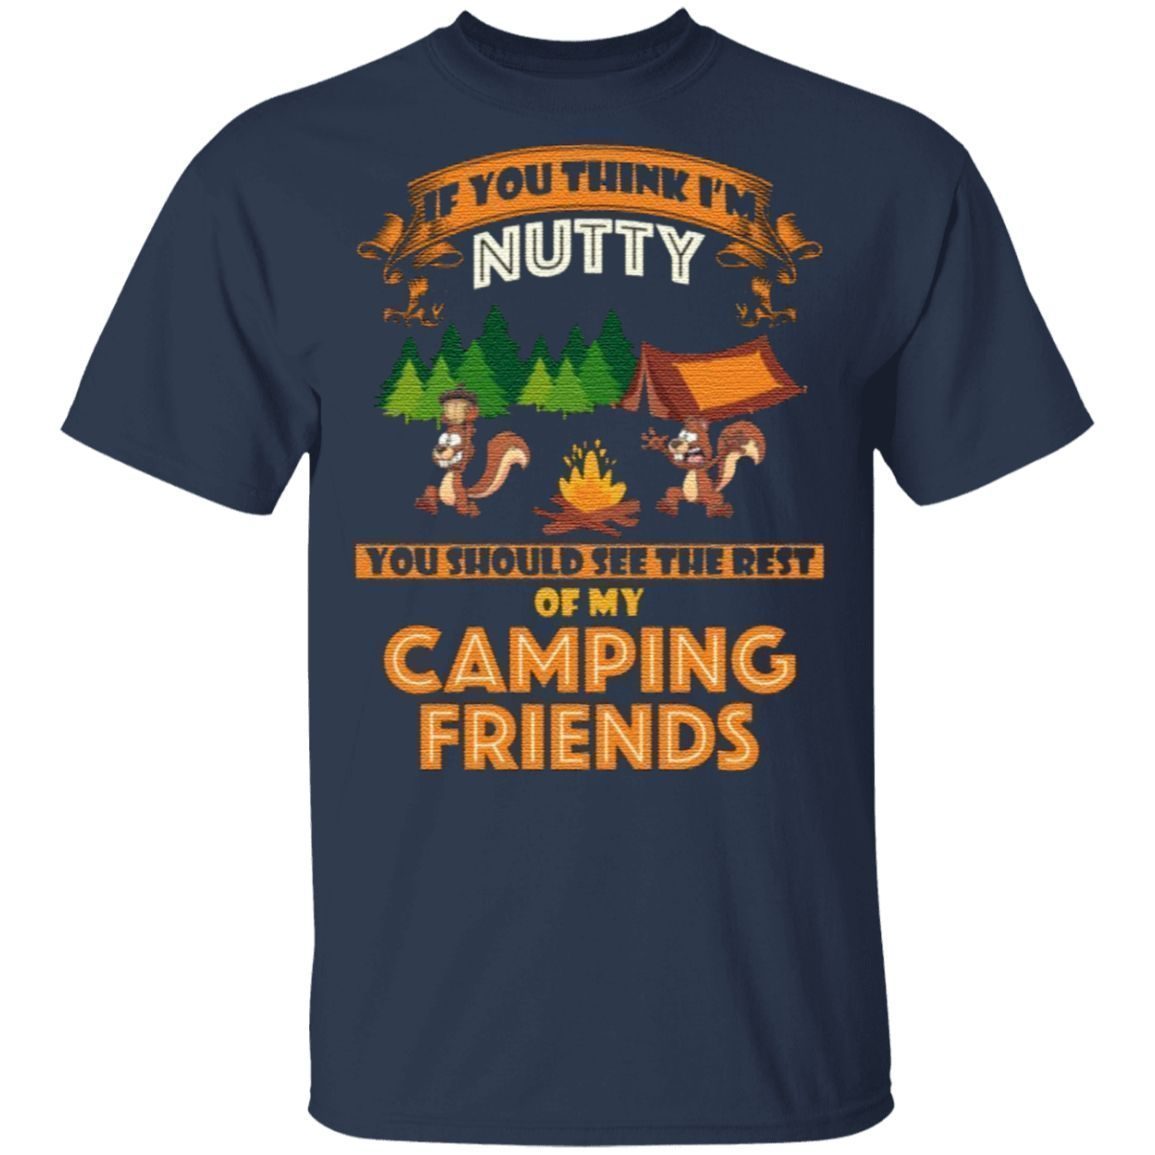 If you think i’m nutty you should see the rest of my camping friends t shirt